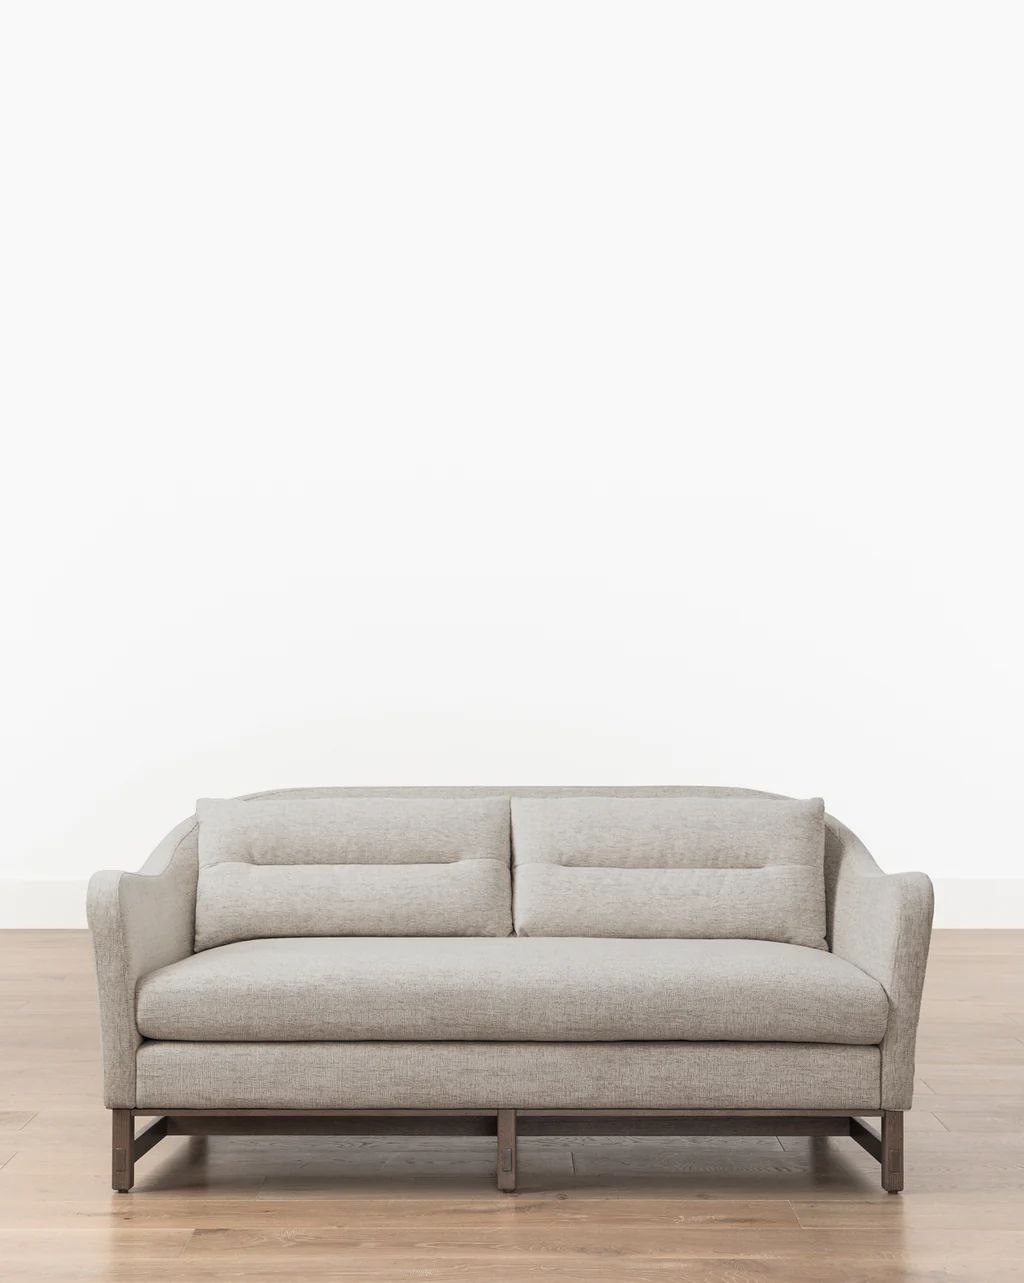 Commodore Settee | McGee & Co.